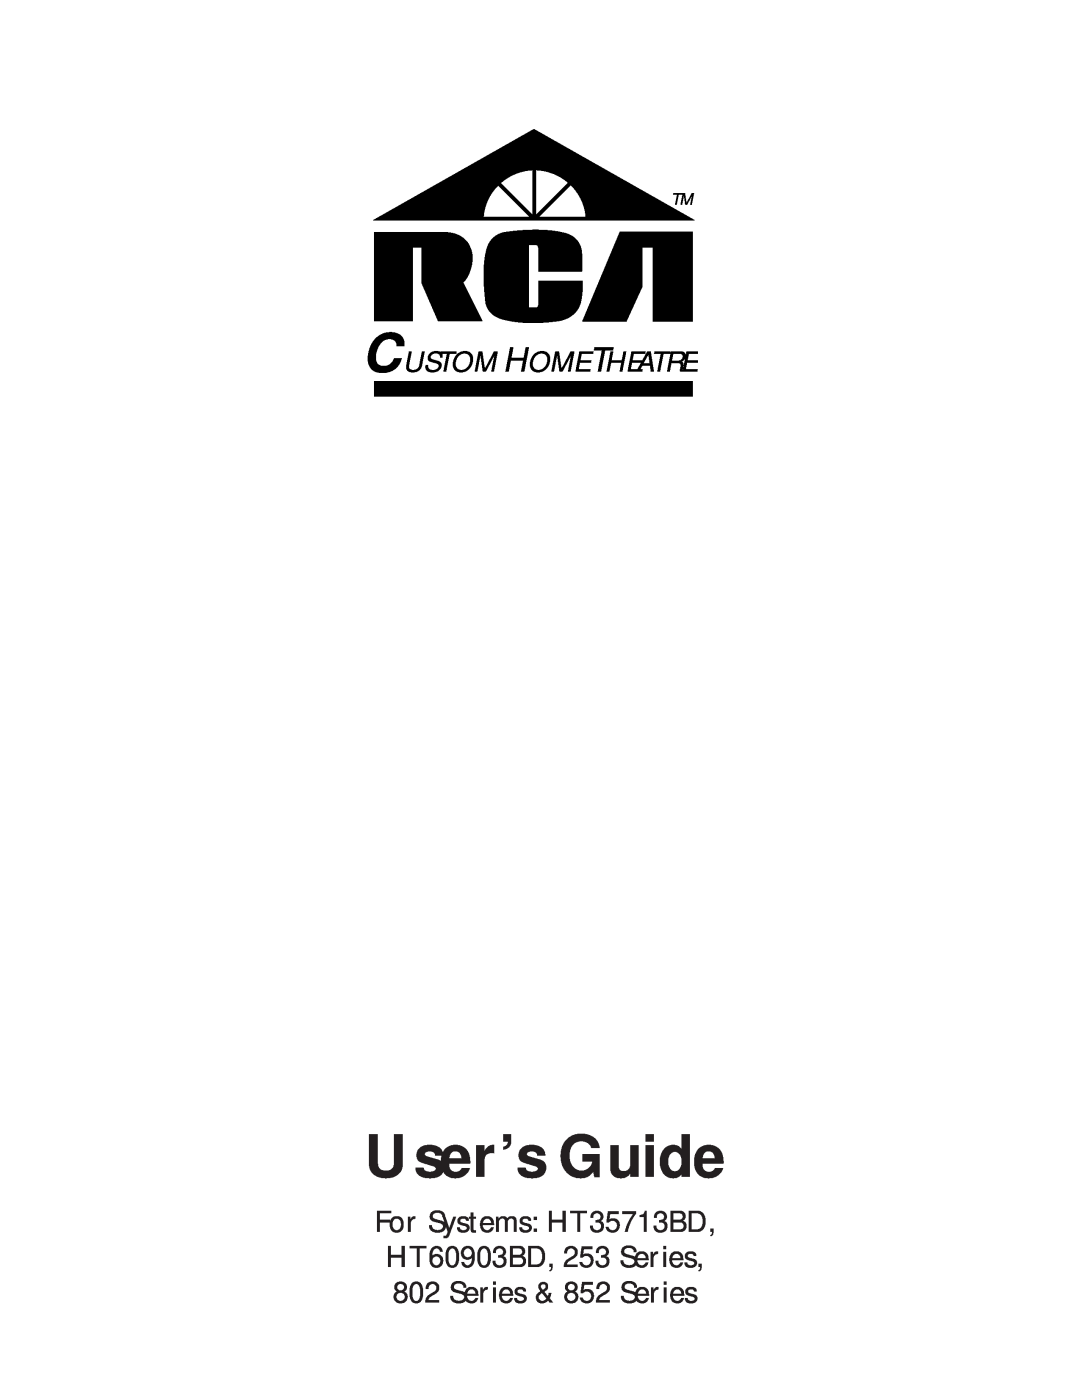 RCA manual User’s Guide, For Systems HT35713BD HT60903BD, 253 Series, Series & 852 Series, Custom Hometheatre 